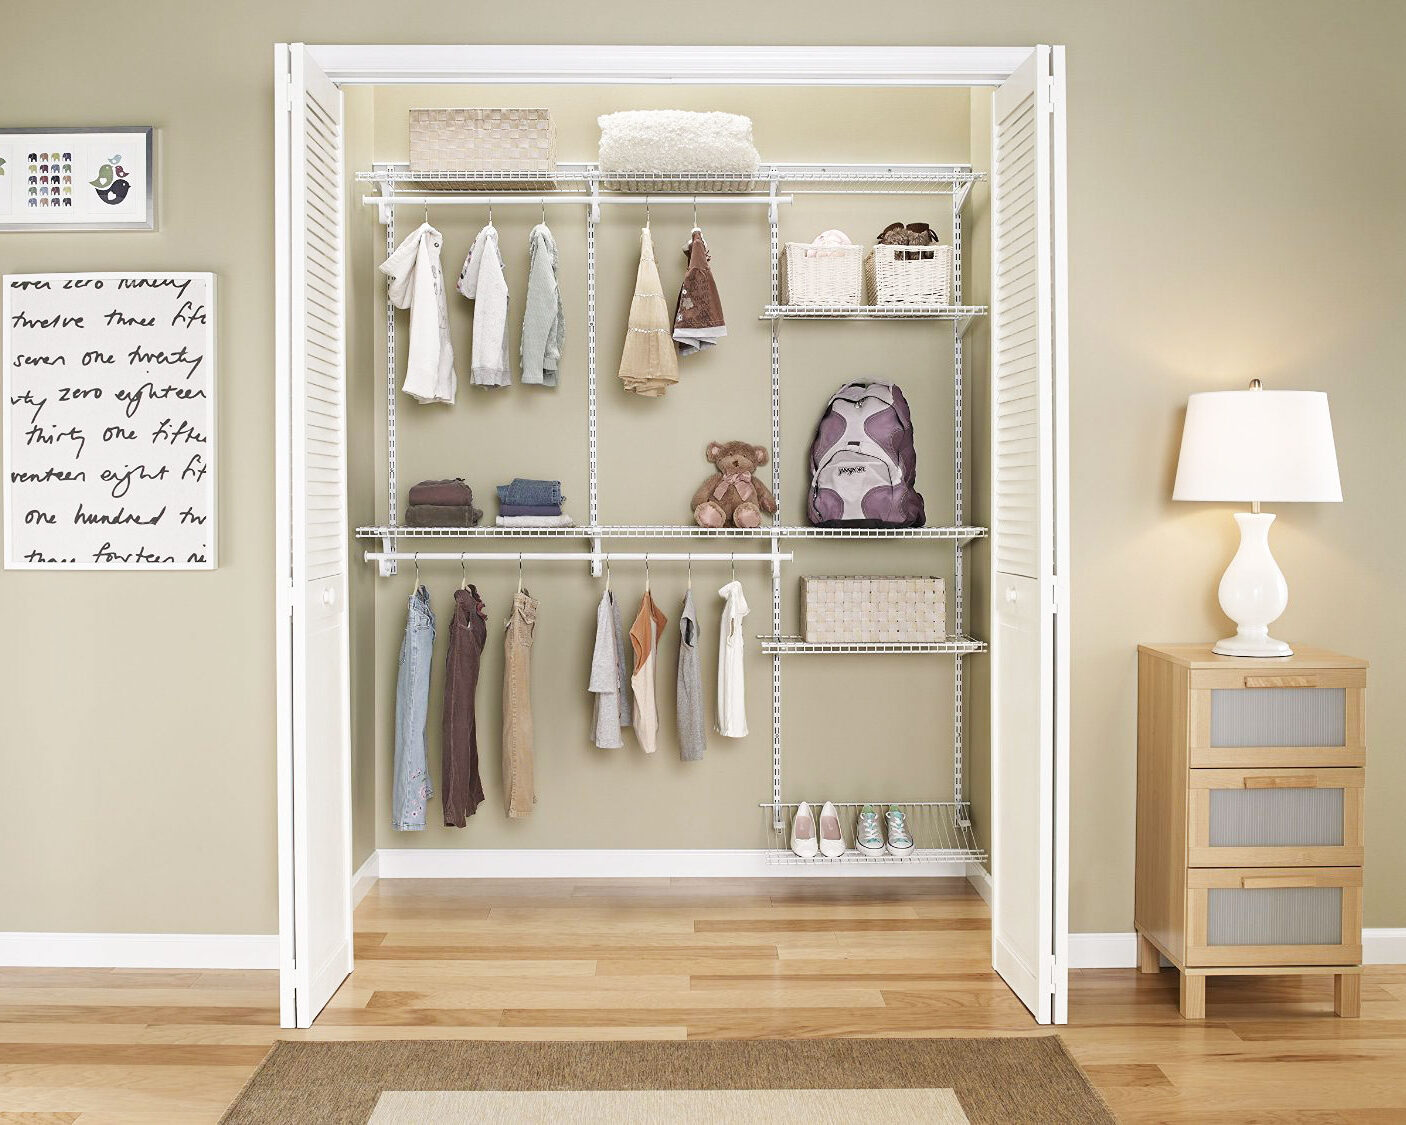 Organizing a deep closet by Collingwood residential cleaners Lighthouse Windows